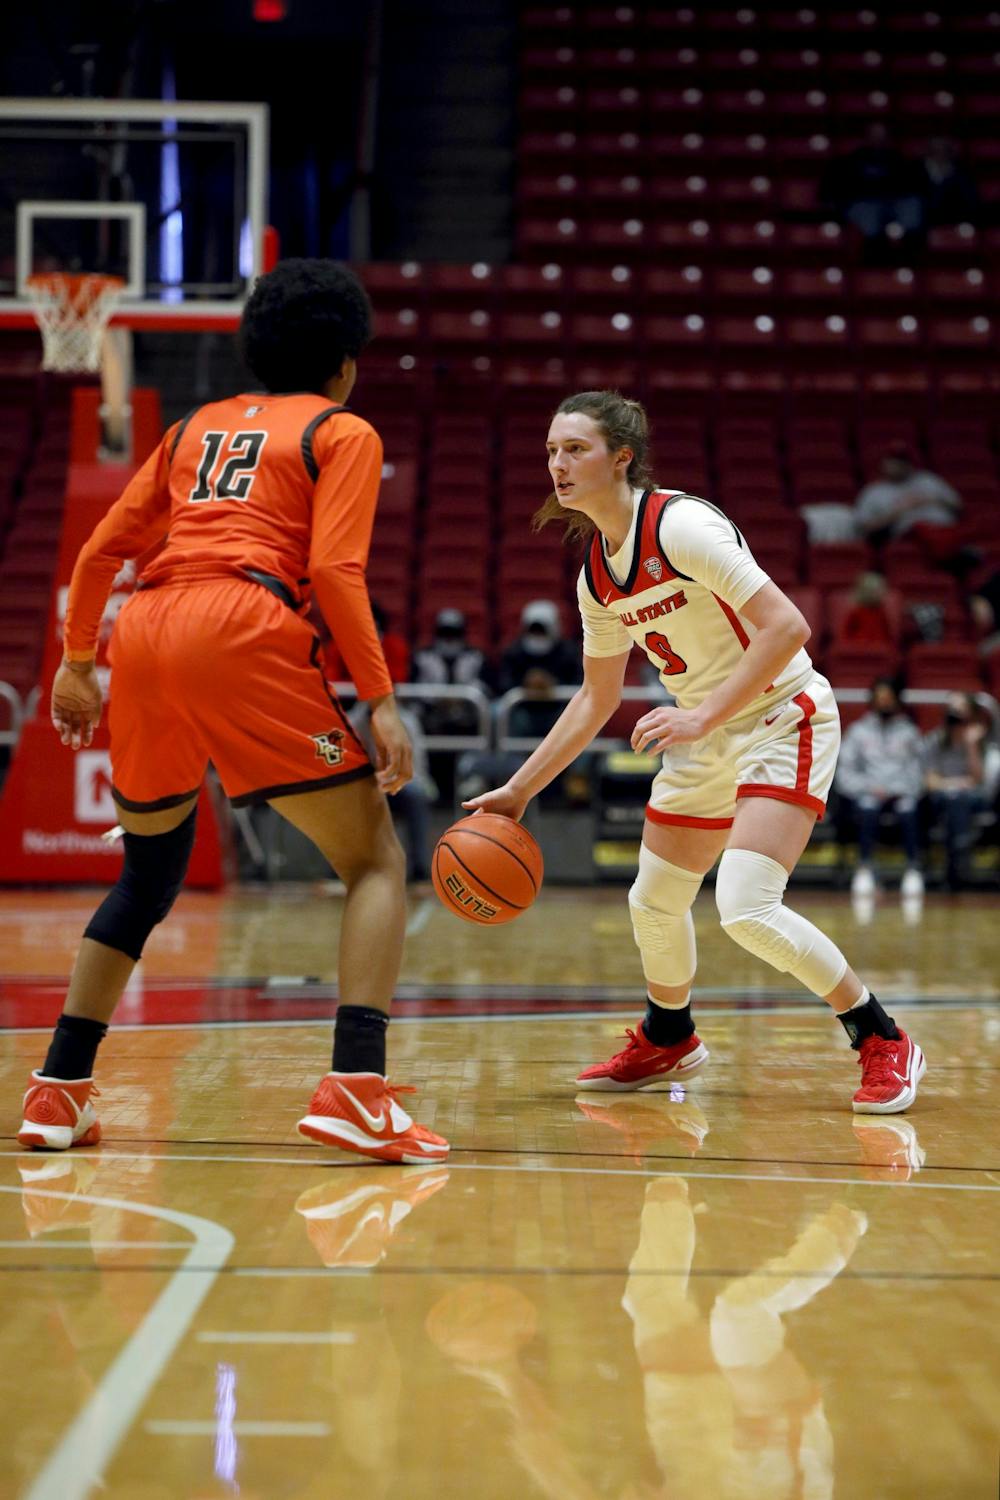 Freshman Ally Becki dribbles the ball on the court against Bowling Green on Feb. 5, 2022, at Worthen Arena in Muncie, IN. Becki scored 15 points during the game. Amber Pietz, DN